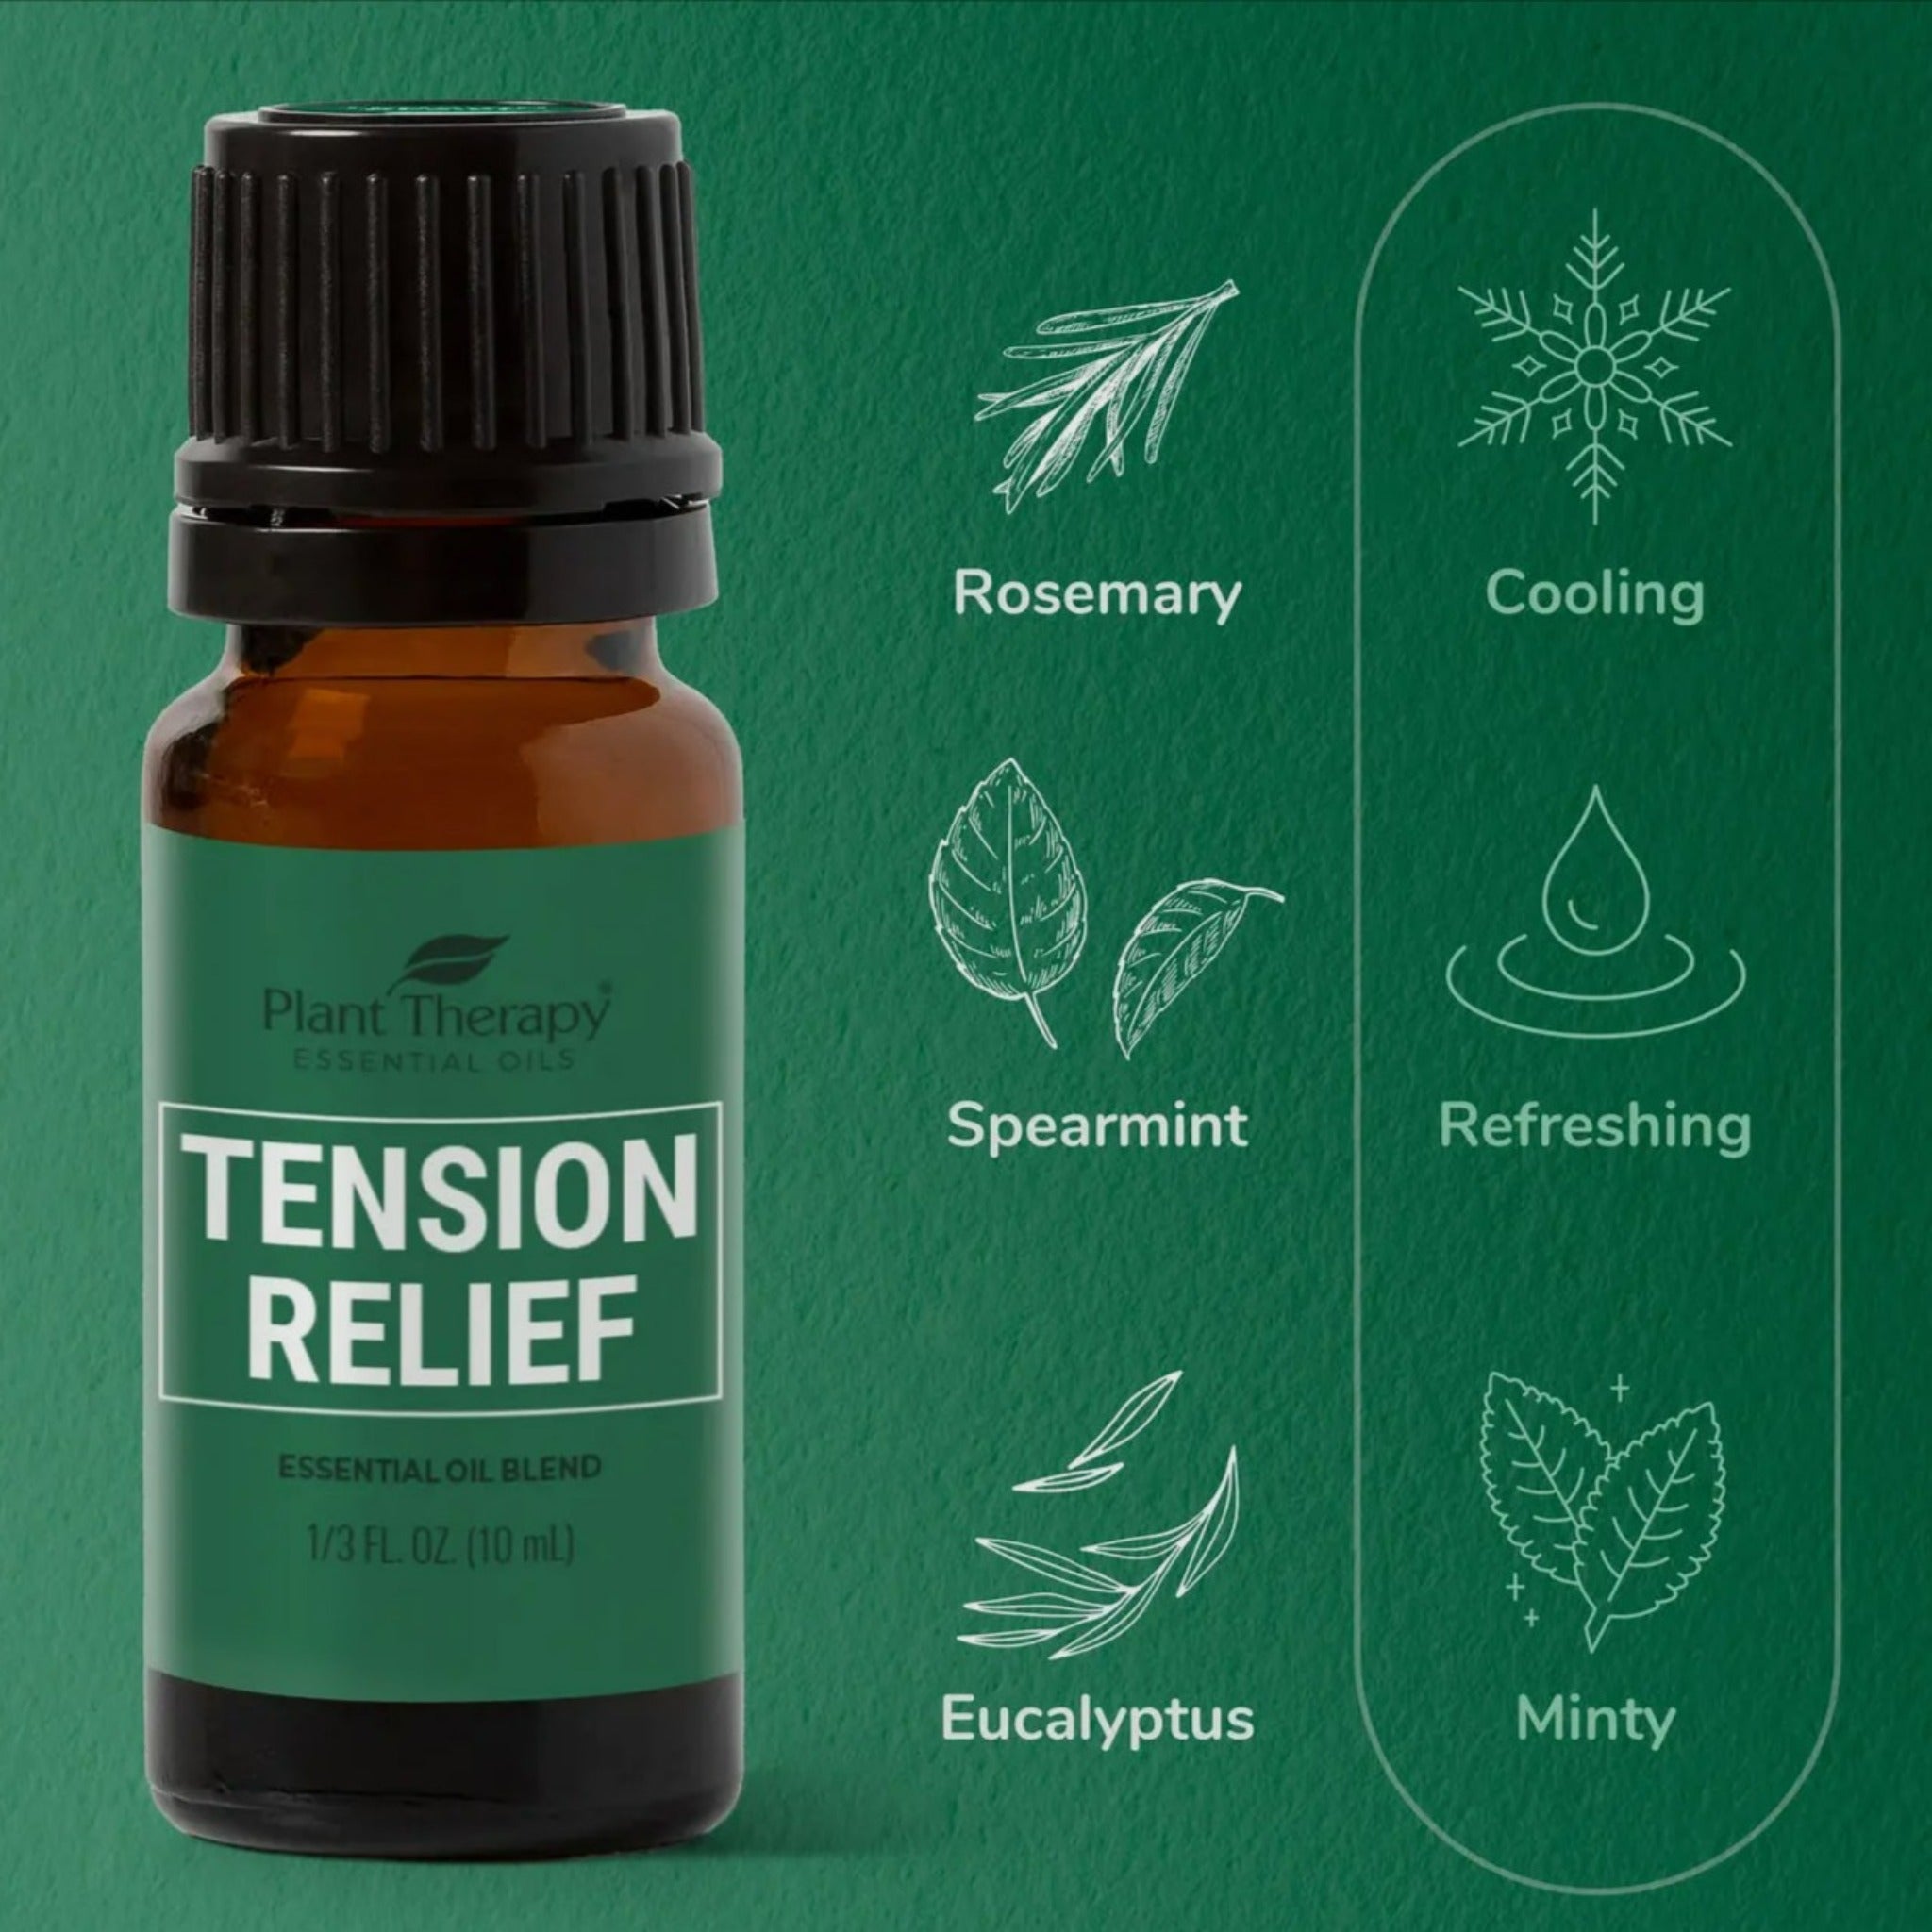 Aromatherapy Essential Oil Blend - TENSION RELIEF Plant Therapy